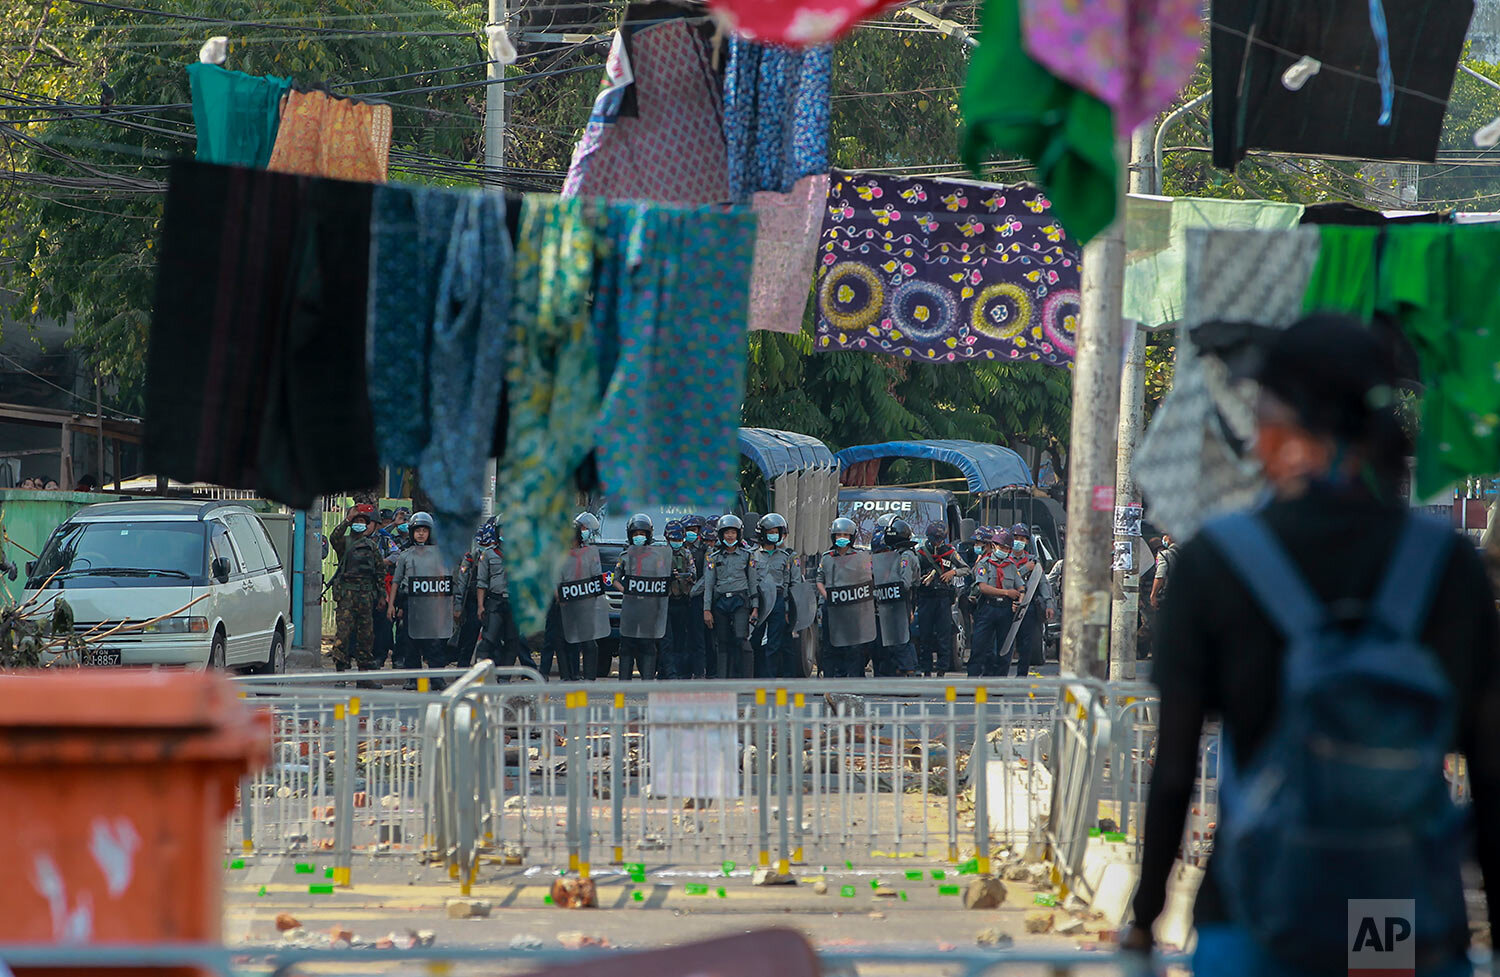  Anti-coup protesters stand behind a line of women's clothing hanging across a road to deter security personnel from entering the protest area in Yangon, Myanmar Tuesday, March 9, 2021. (AP Photo) 